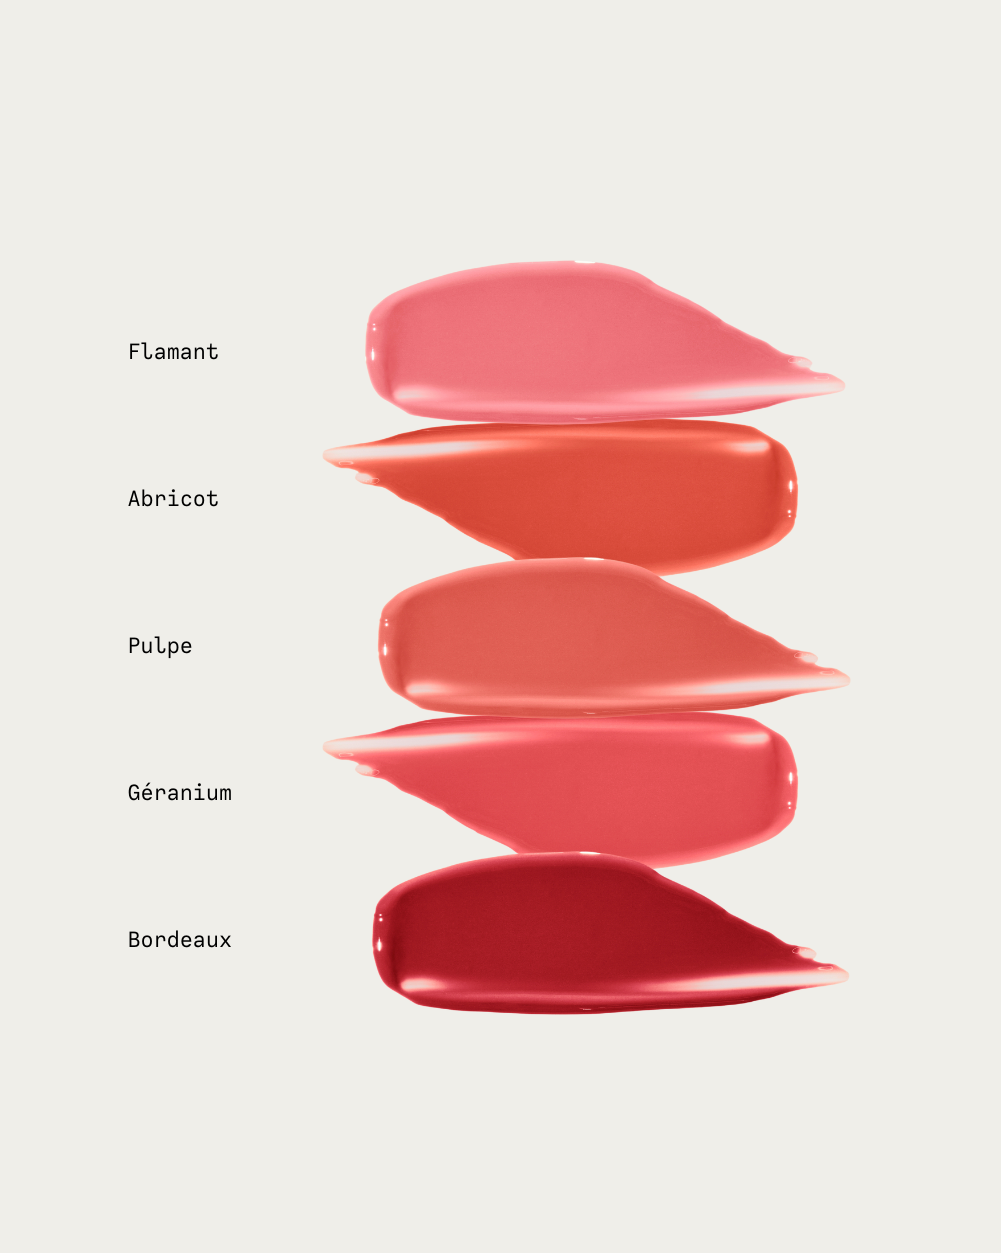 SWATCHES_8dfe8095-04c6-4a2e-b3a8-106ae78acbfc.png